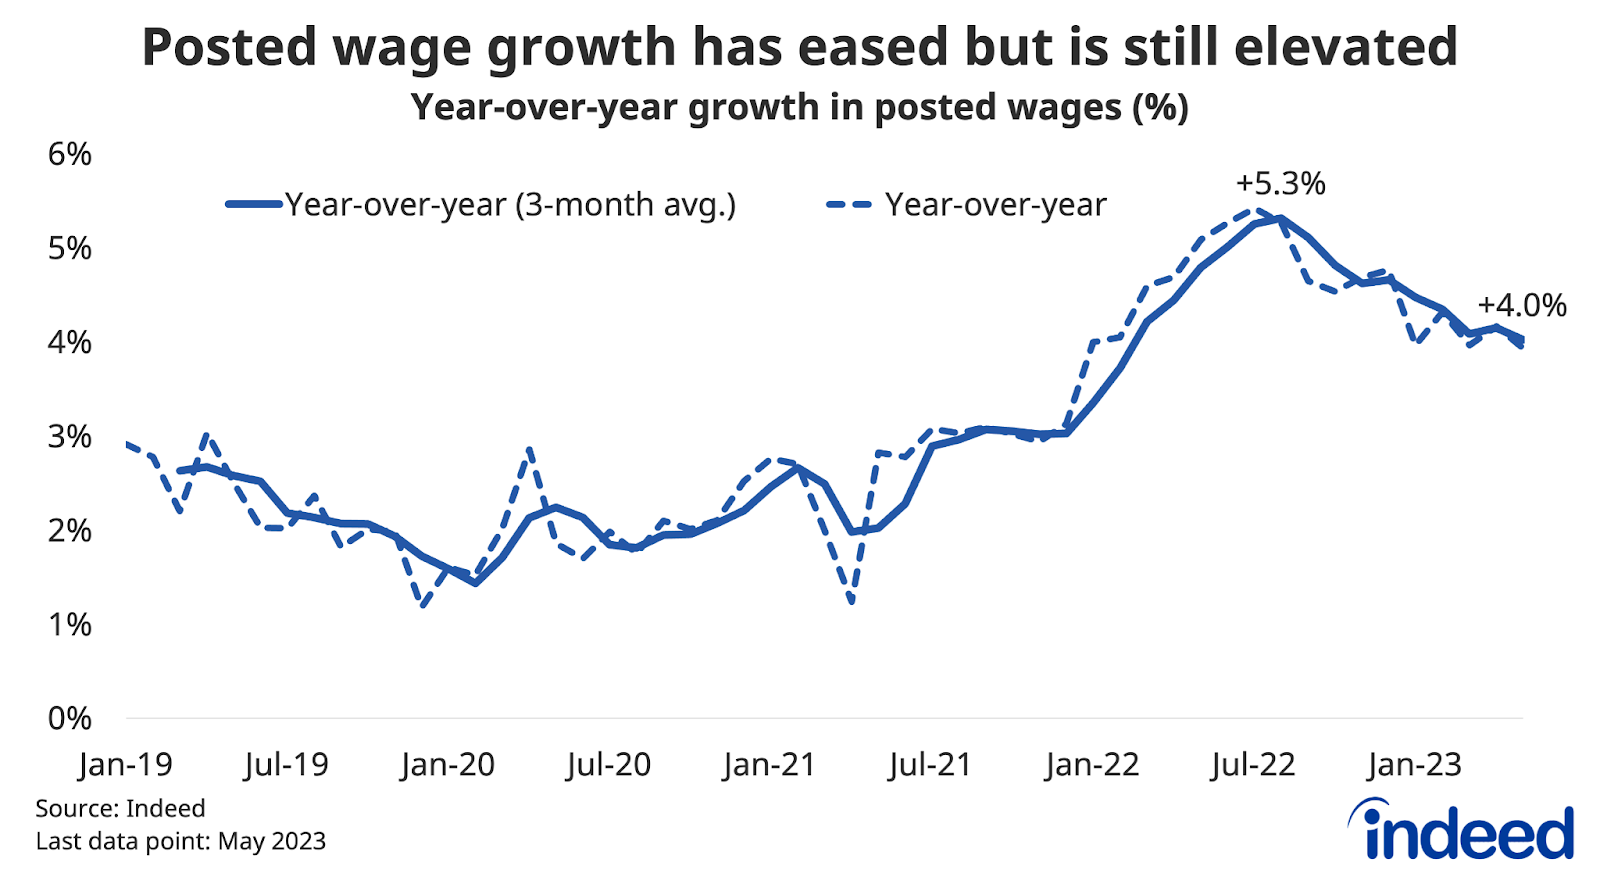 Line chart titled “Posted wage growth has eased but is still elevated,” shows the year-over-year growth of Canadian posted wages on Indeed, and its three-month average between January 2019 and May 2023. Posted wage growth rose in the first half of 2022, peaking at 5.3% in the summer, but has cooled since, to 4.0% as of May. 